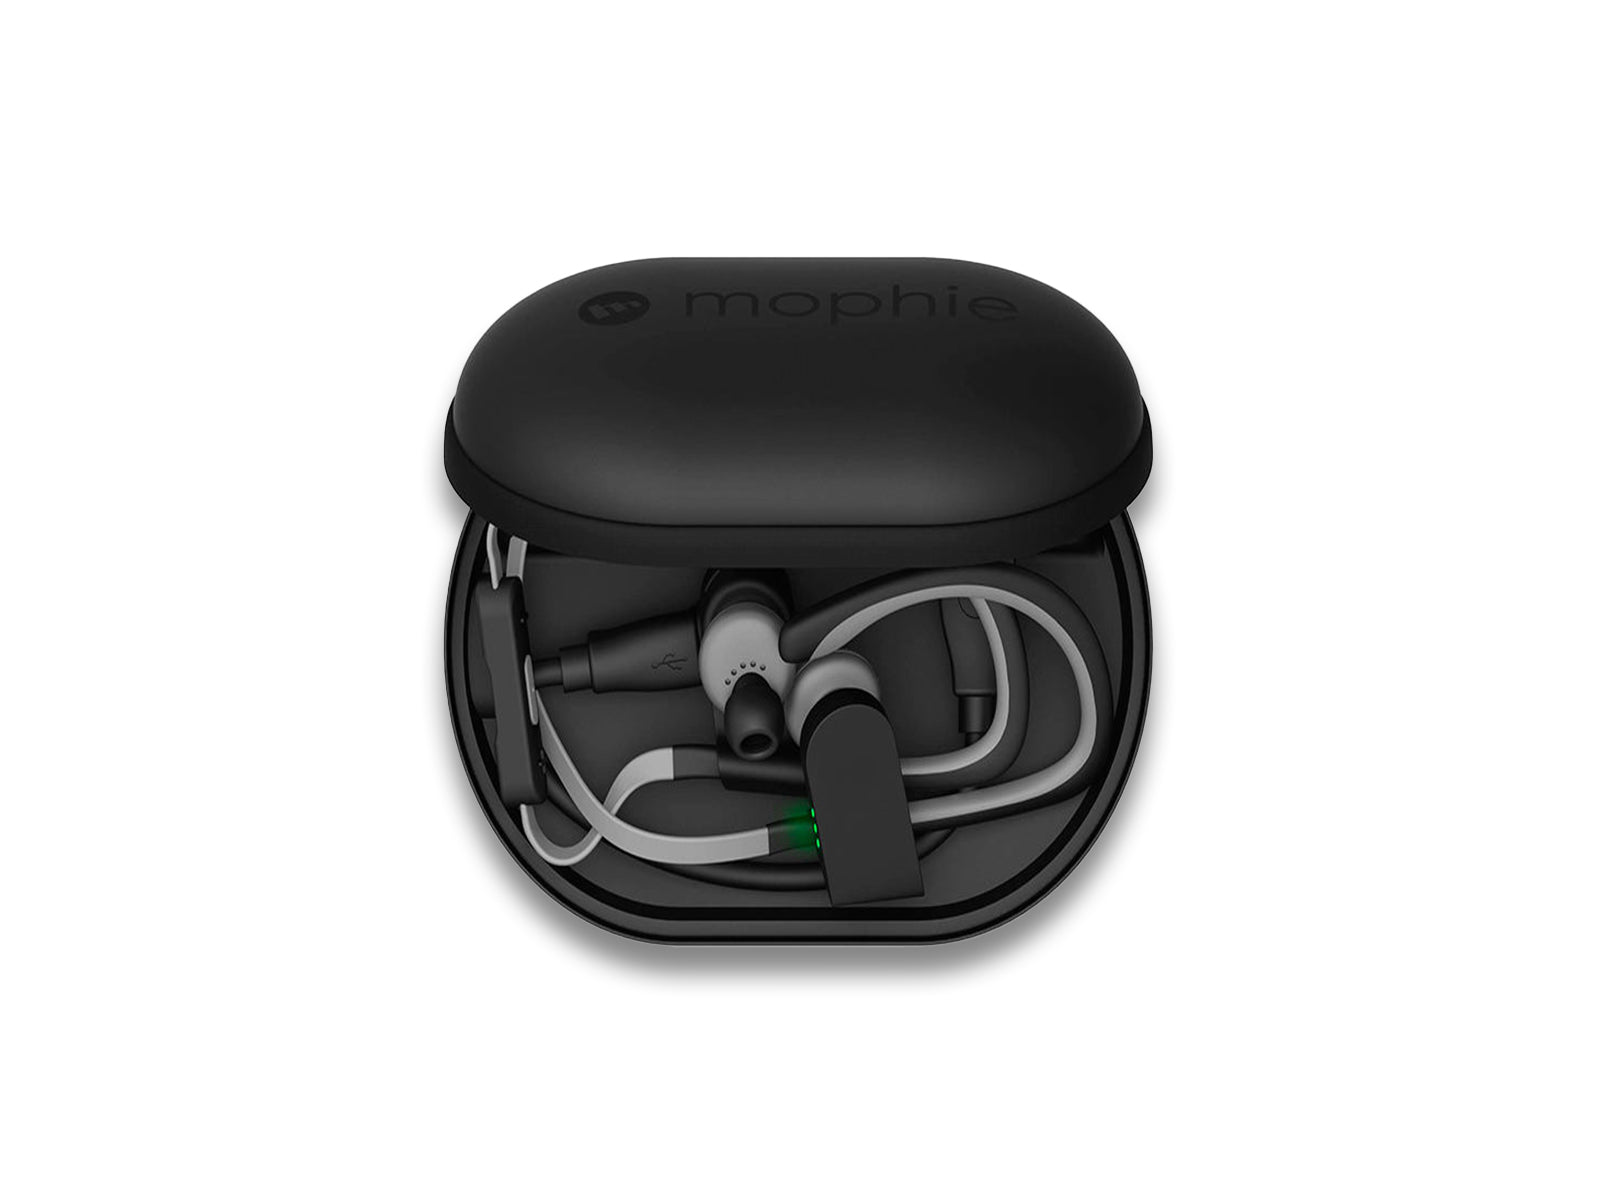 Image shows top view of mophie power capsule with ear buds inside on white background